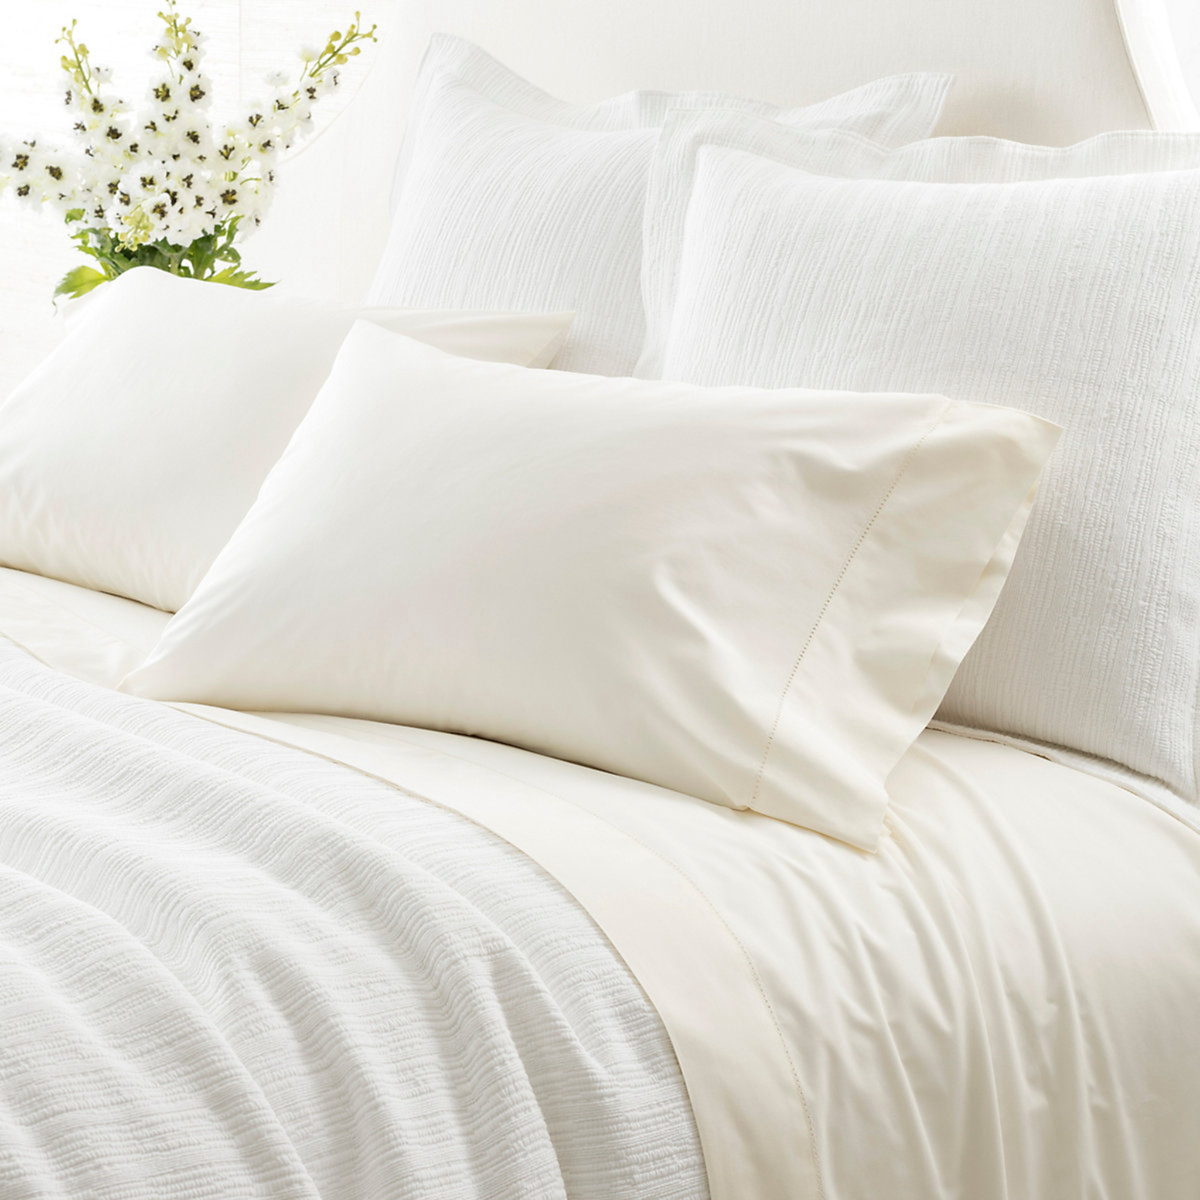 Pillowcases and Flat Sheet of Ivory Pine Cone Hill Classic Hemstitch Bedding with Coordinate